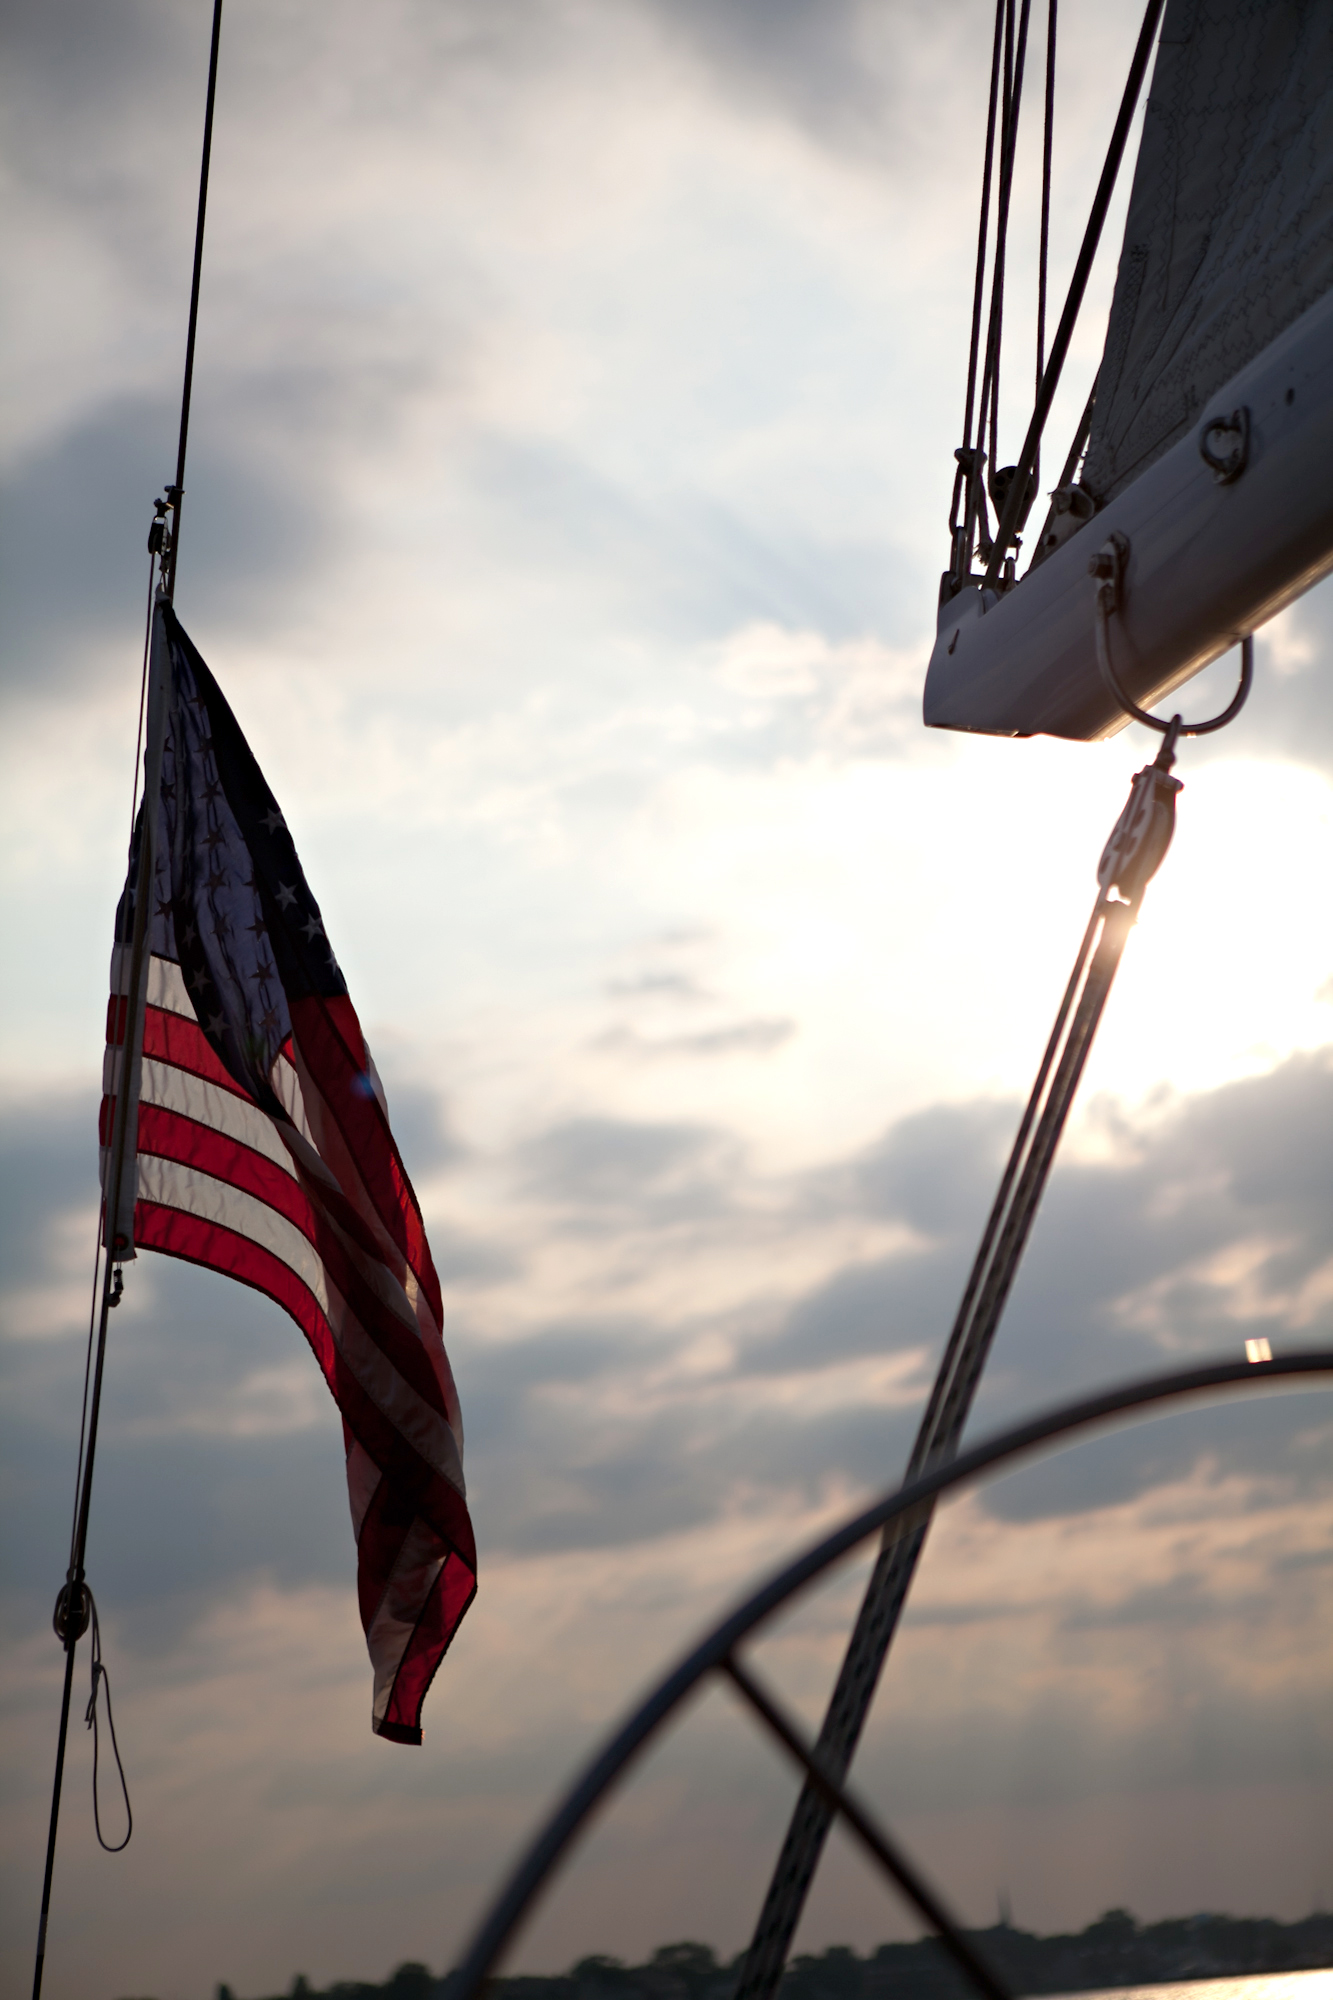 American Flag at the helm of the schooner in the clouds